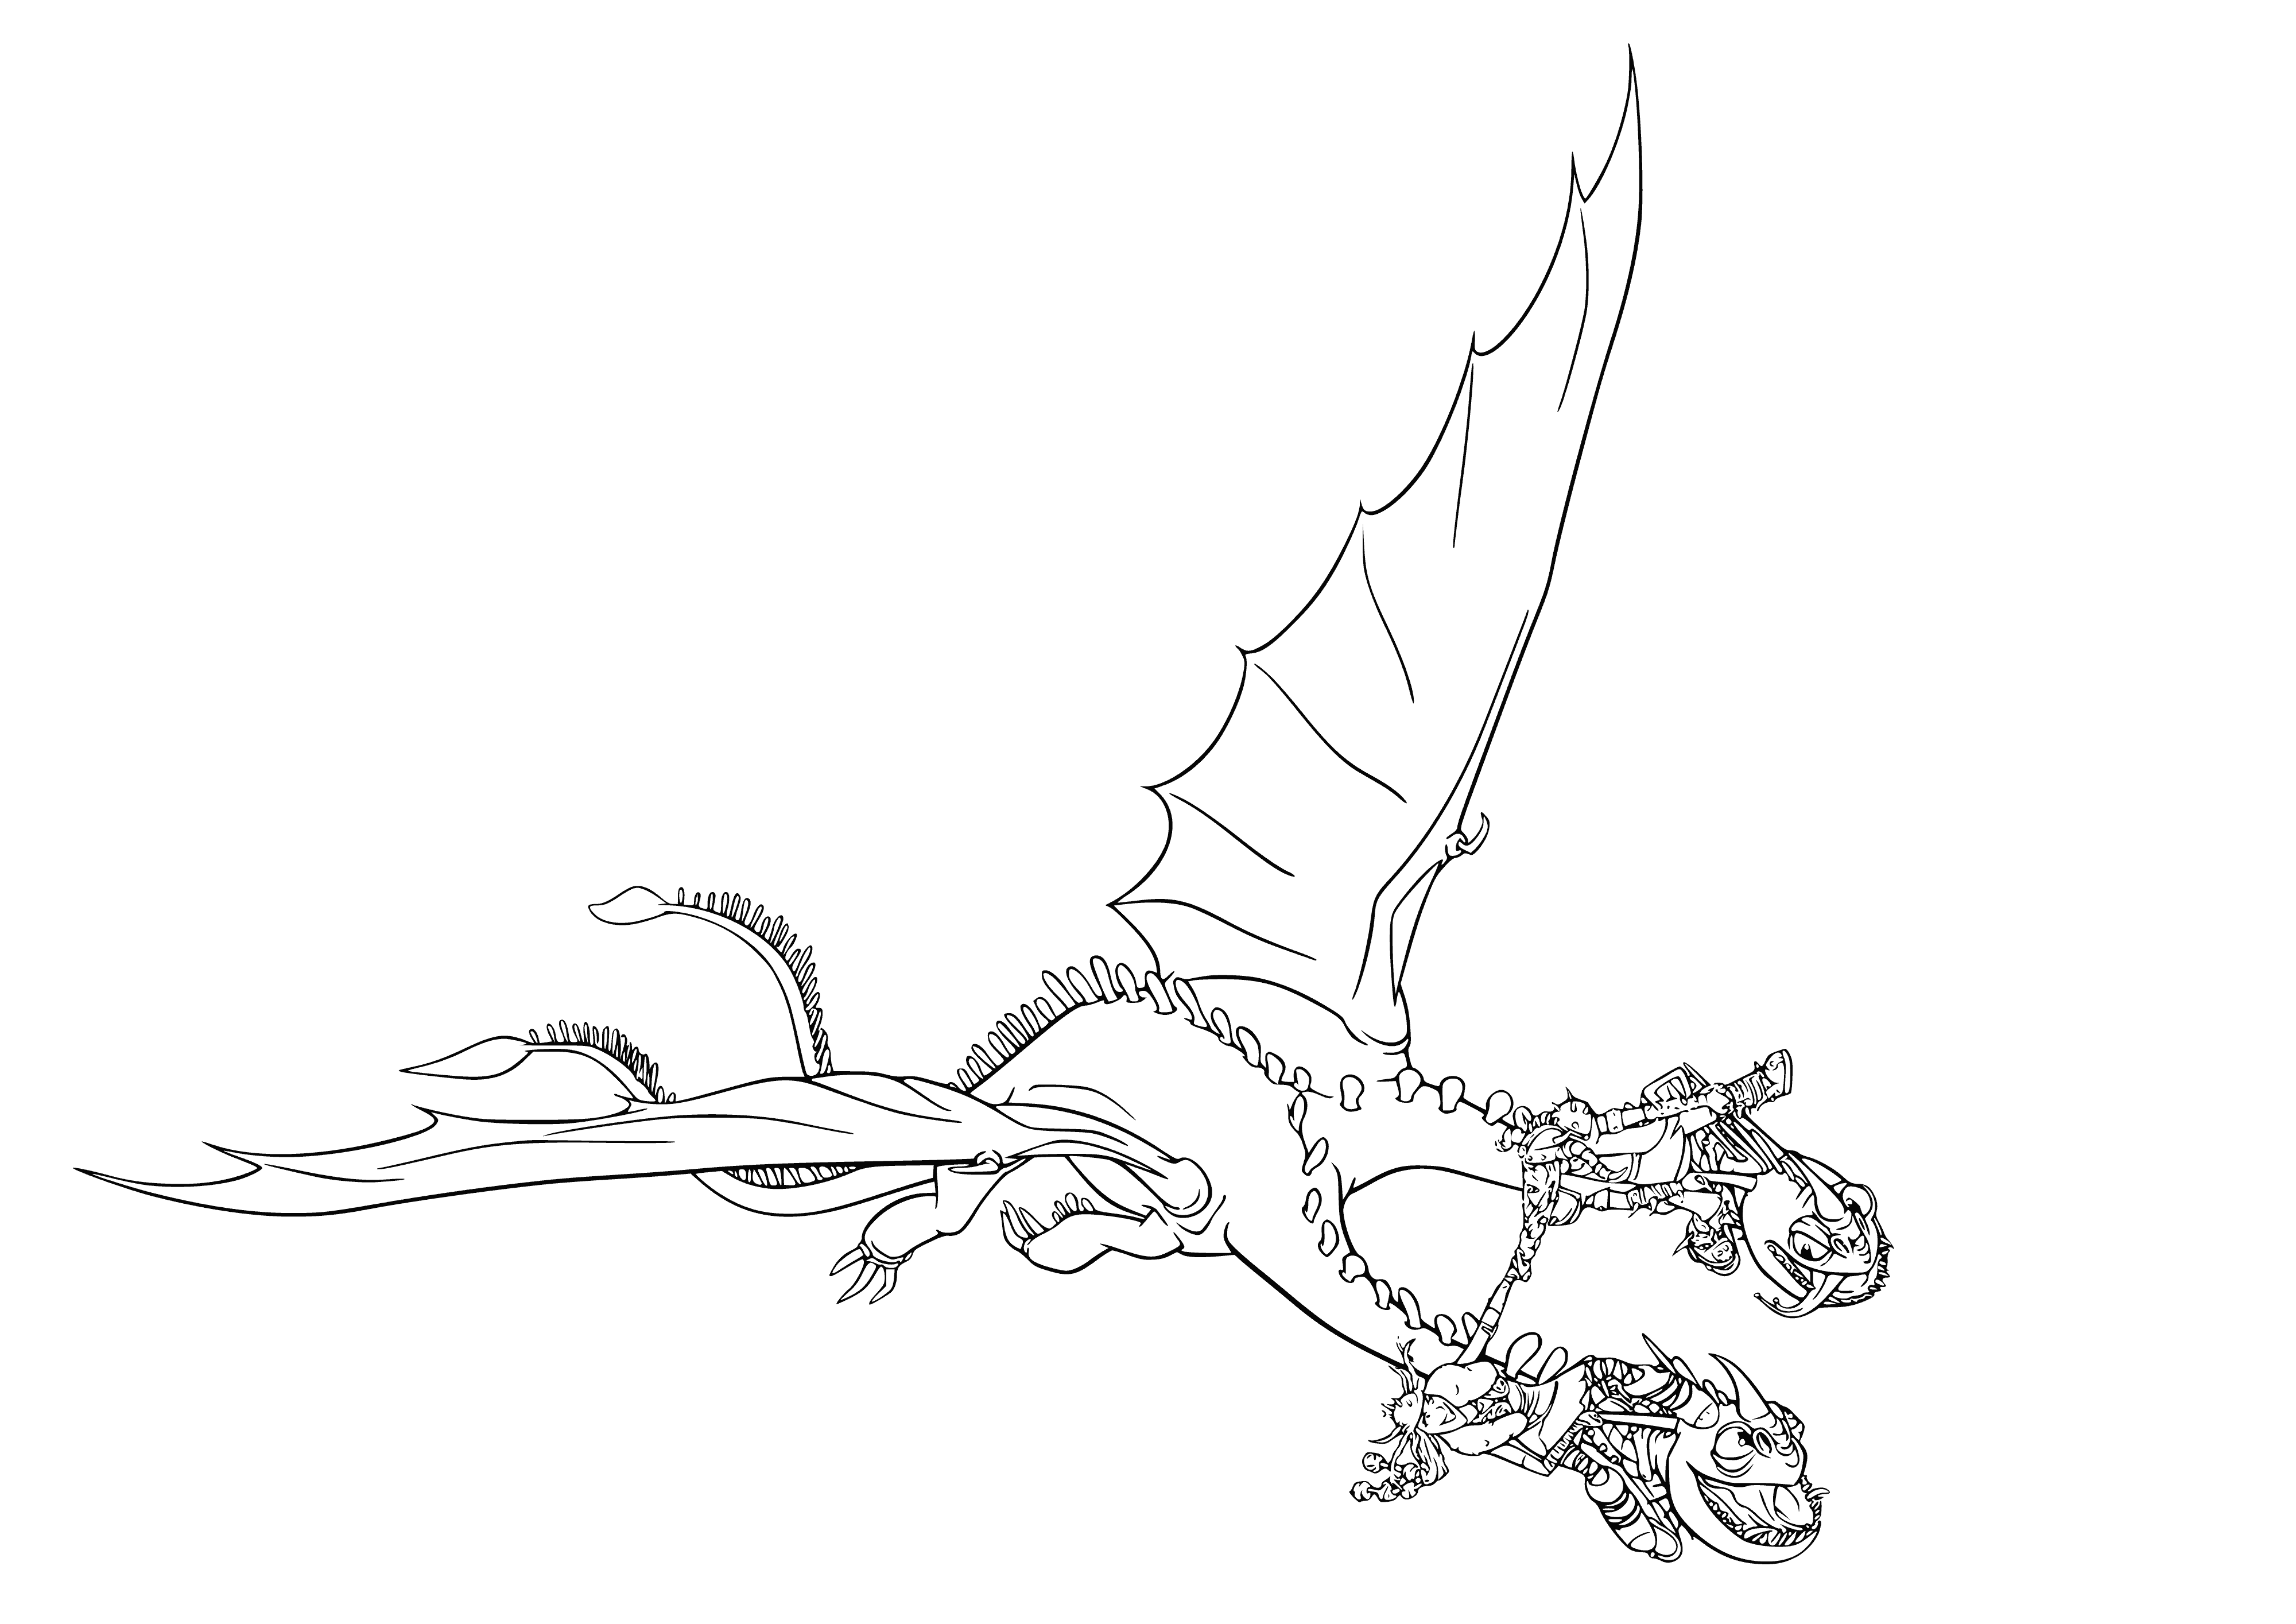 coloring page: Zibiyaka & Zabiraka ride the Straphead, a large white dragon w/long neck & tail, strong body & outstretched wings. They have a great time flying! #fantasy #dragonriders